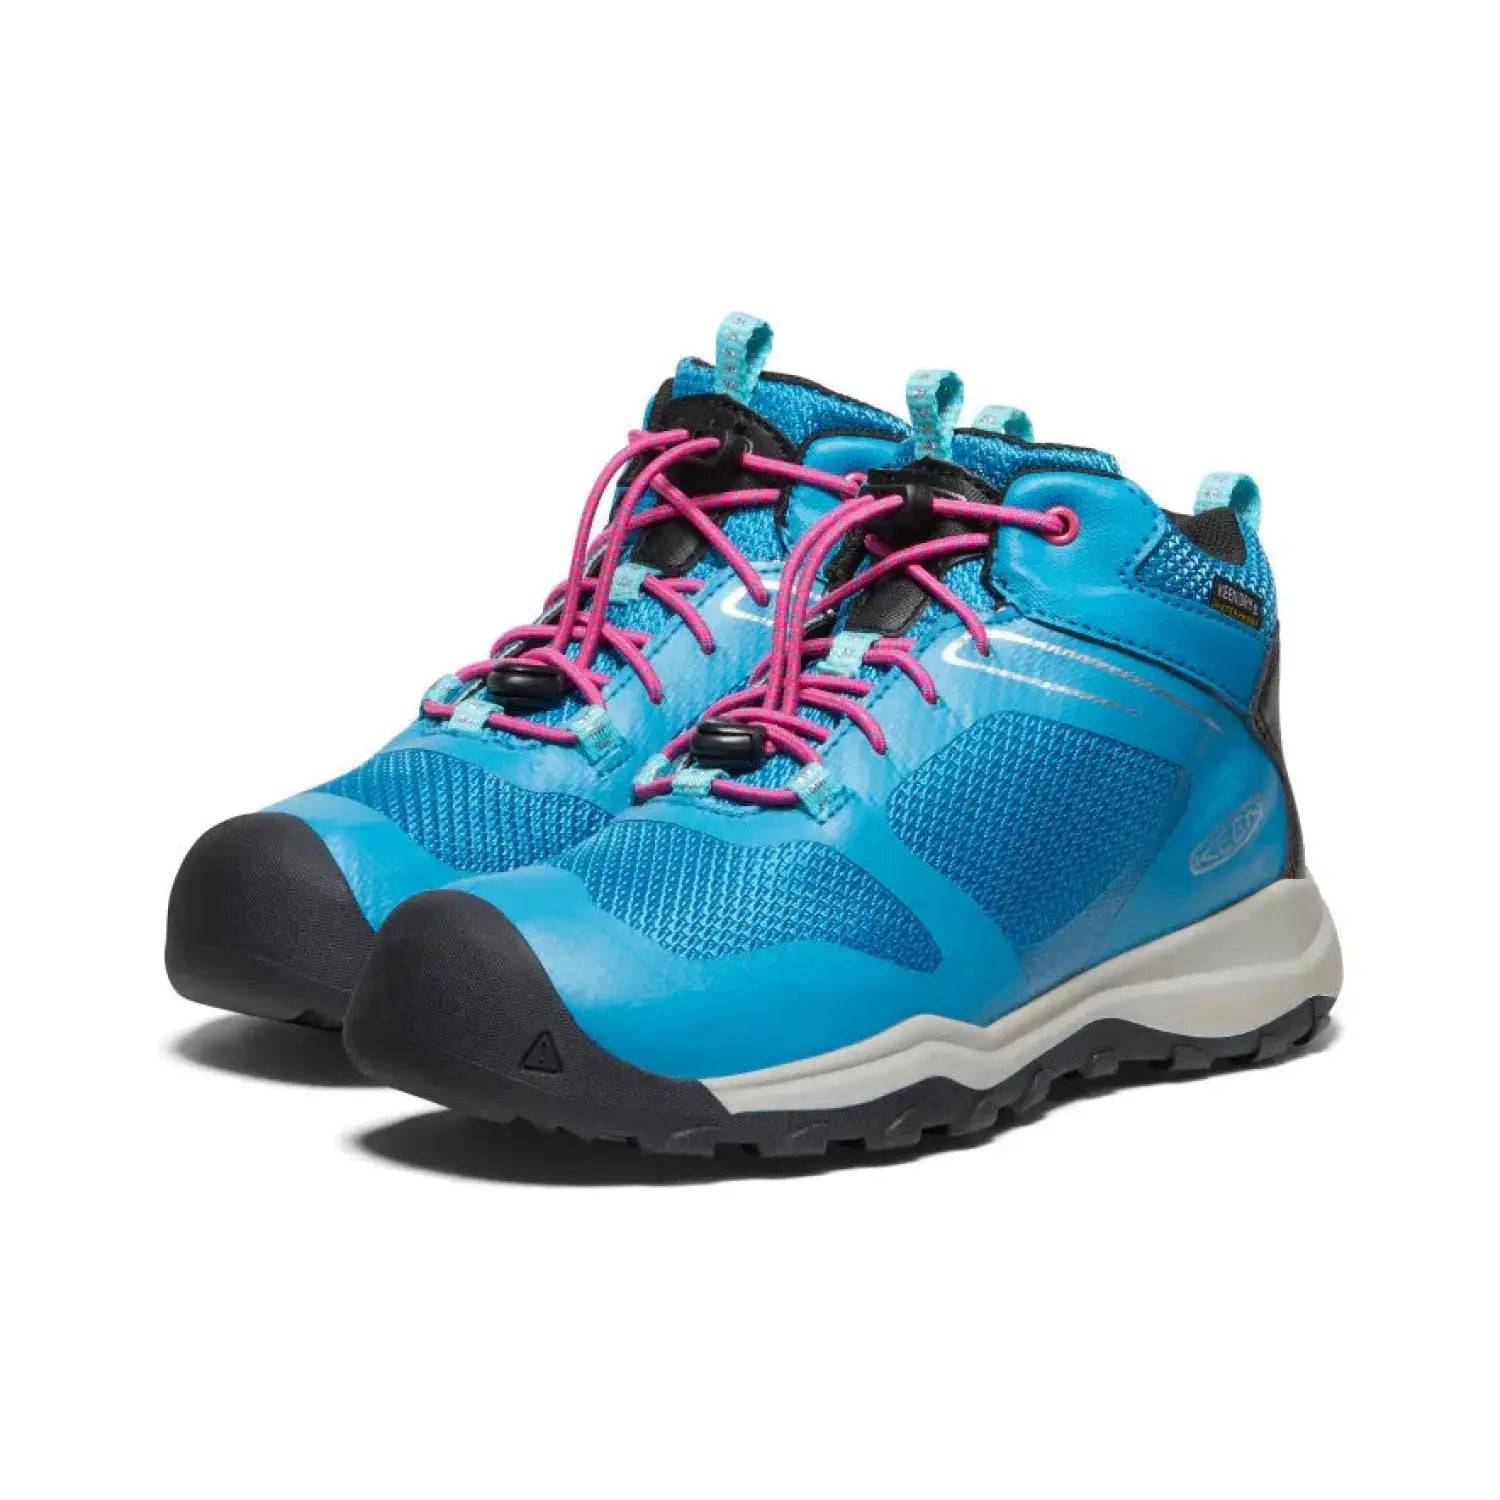 Keen's Wanduro Waterproof Boot in Fjord Blue with fuchsia pull laces. A pair shown from the front at an angle.